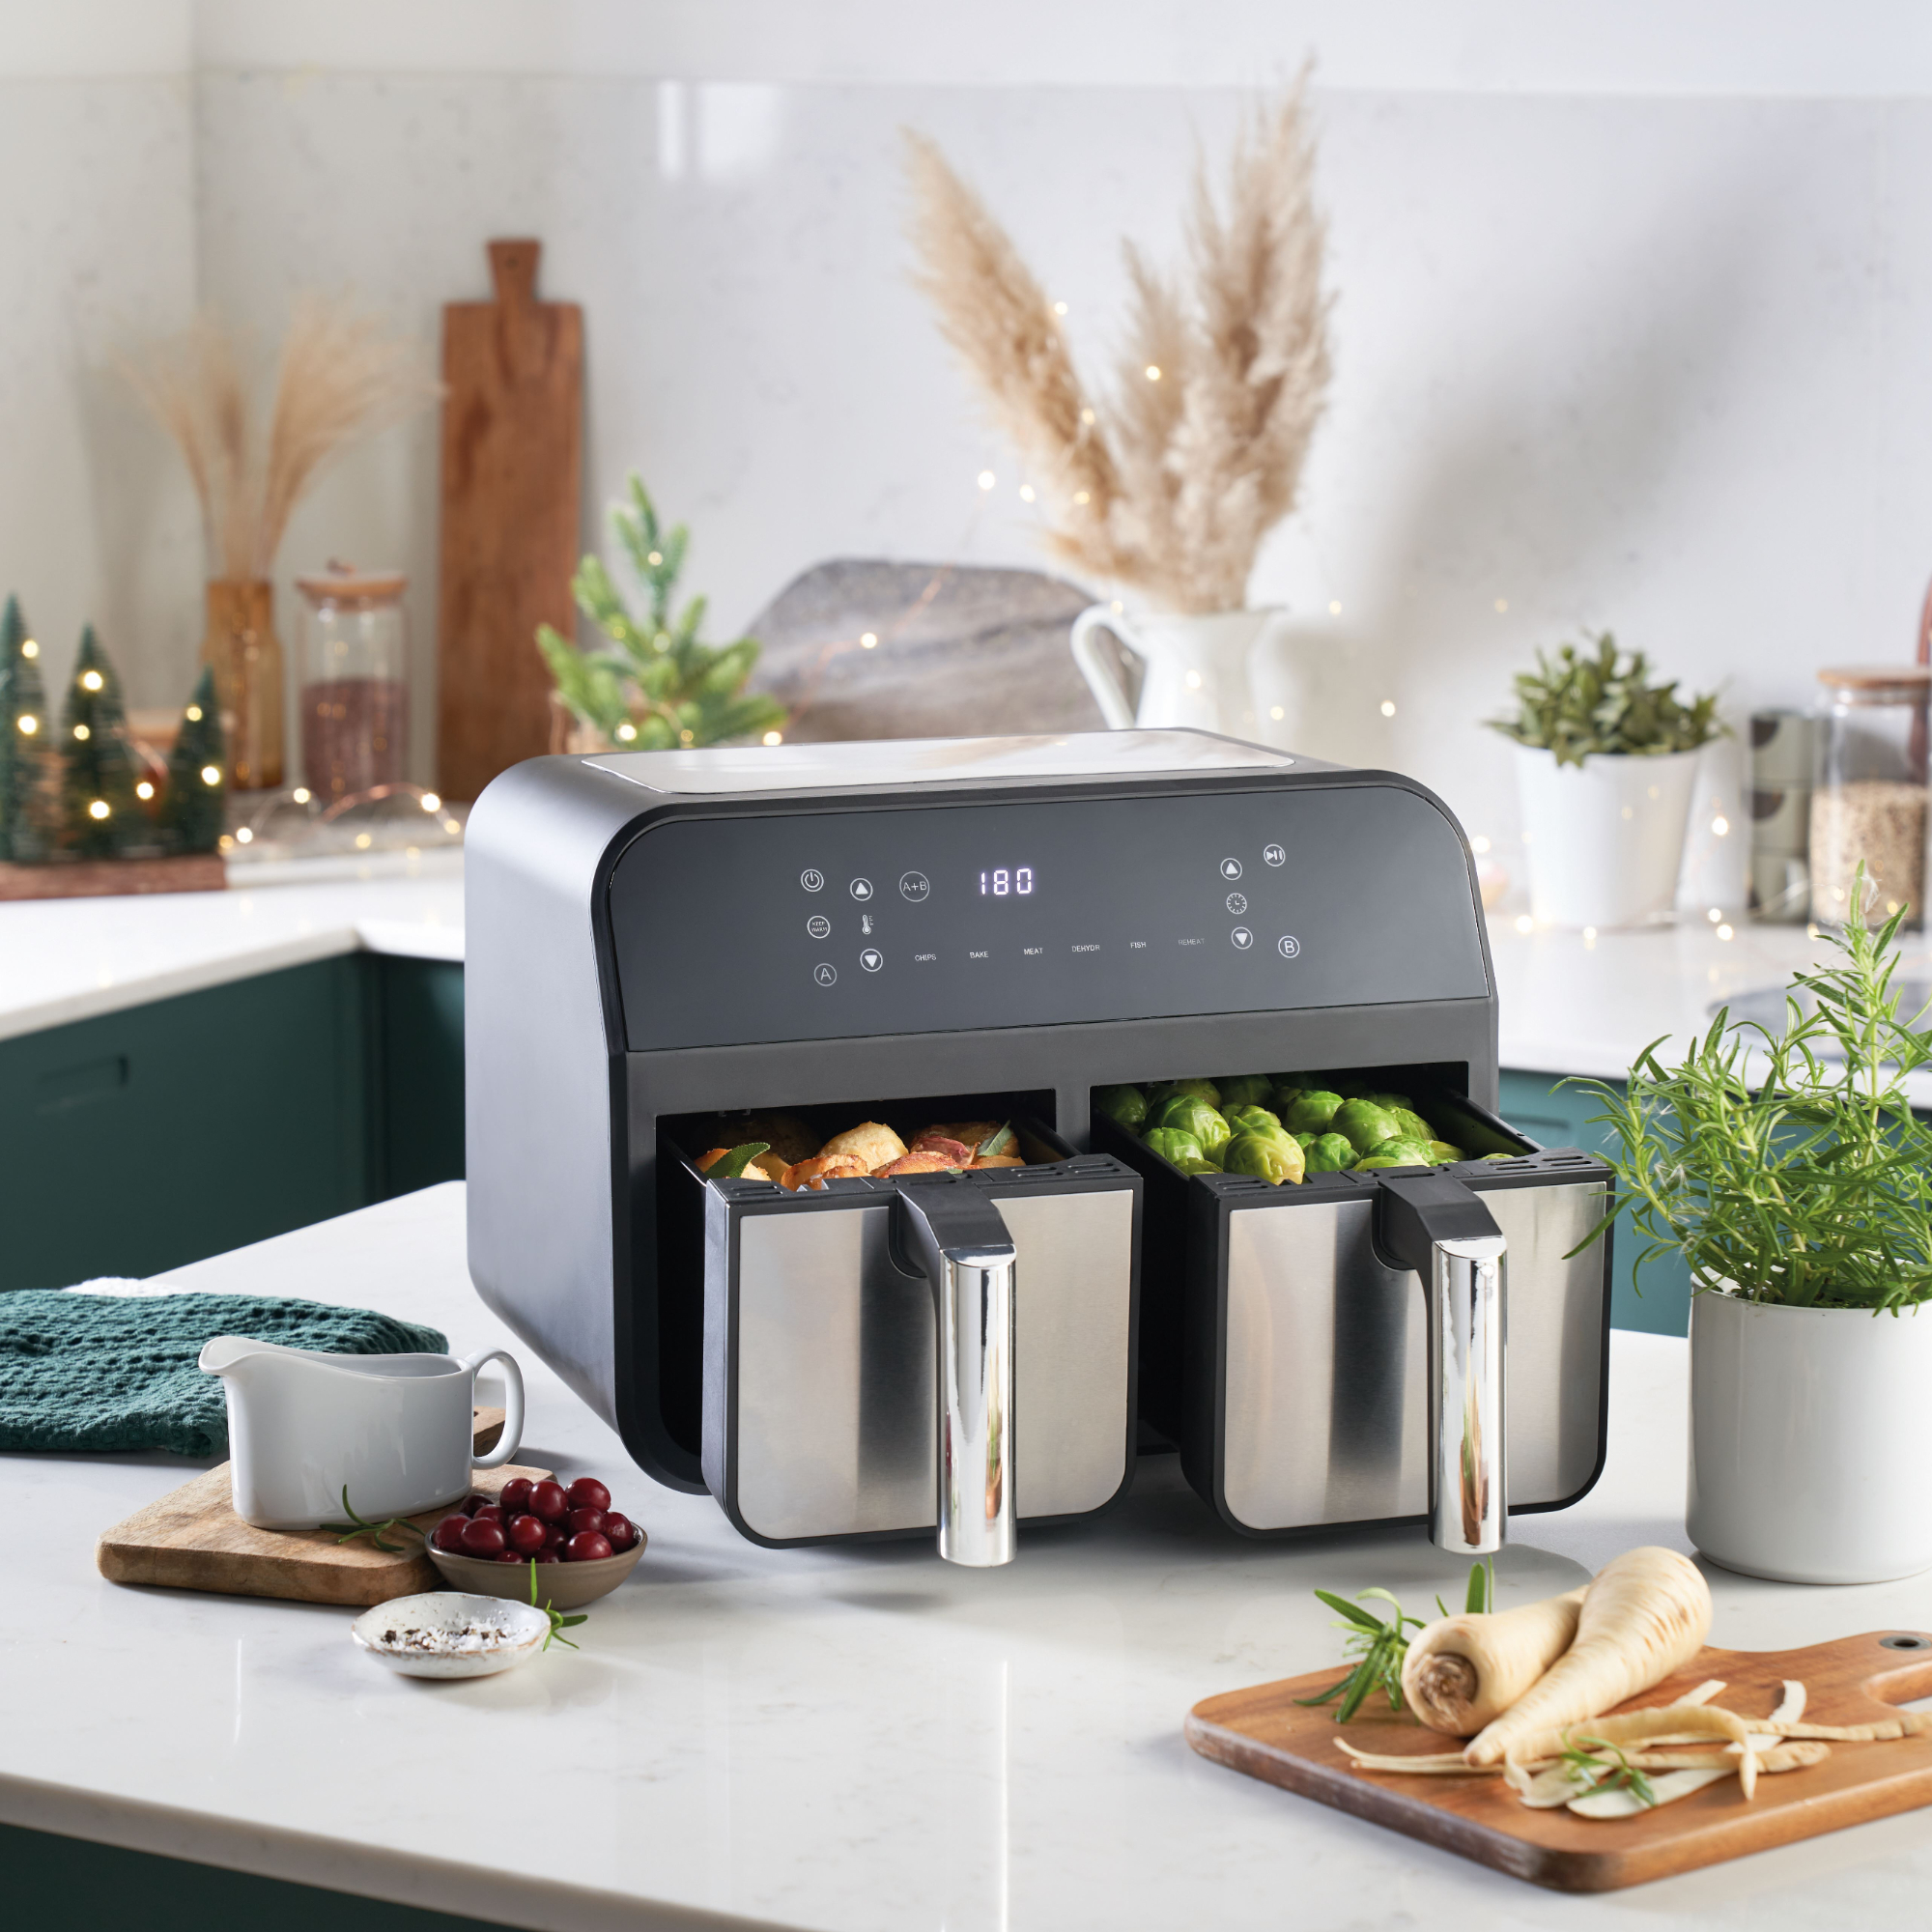 Aldi's Ambiano extra large air fryer is back in stock online